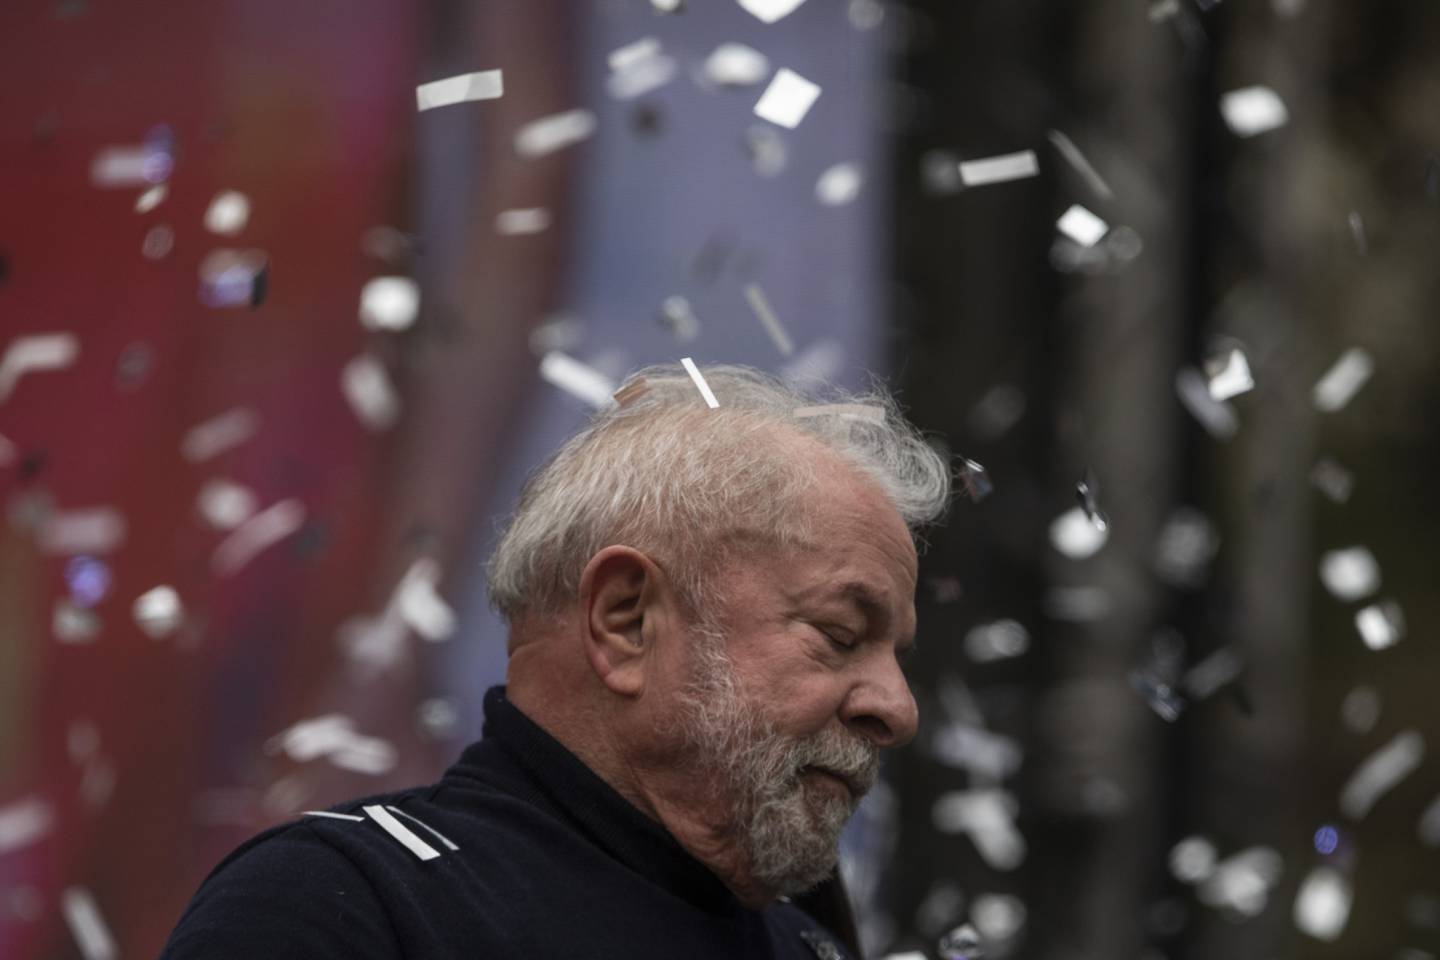 Luiz Inacio Lula da Silva, Brazil's former president, during a campaign event at Vale do Anhangabau in Sao Paulo, Brazil, on Saturday, Aug. 20, 2022. Datafolha election poll released on Thursday showed incumbent President Jair Bolsonaro narrowing the gap to front-runner Lula to 15 percentage points from 18 points in July and 21 points in May.dfd